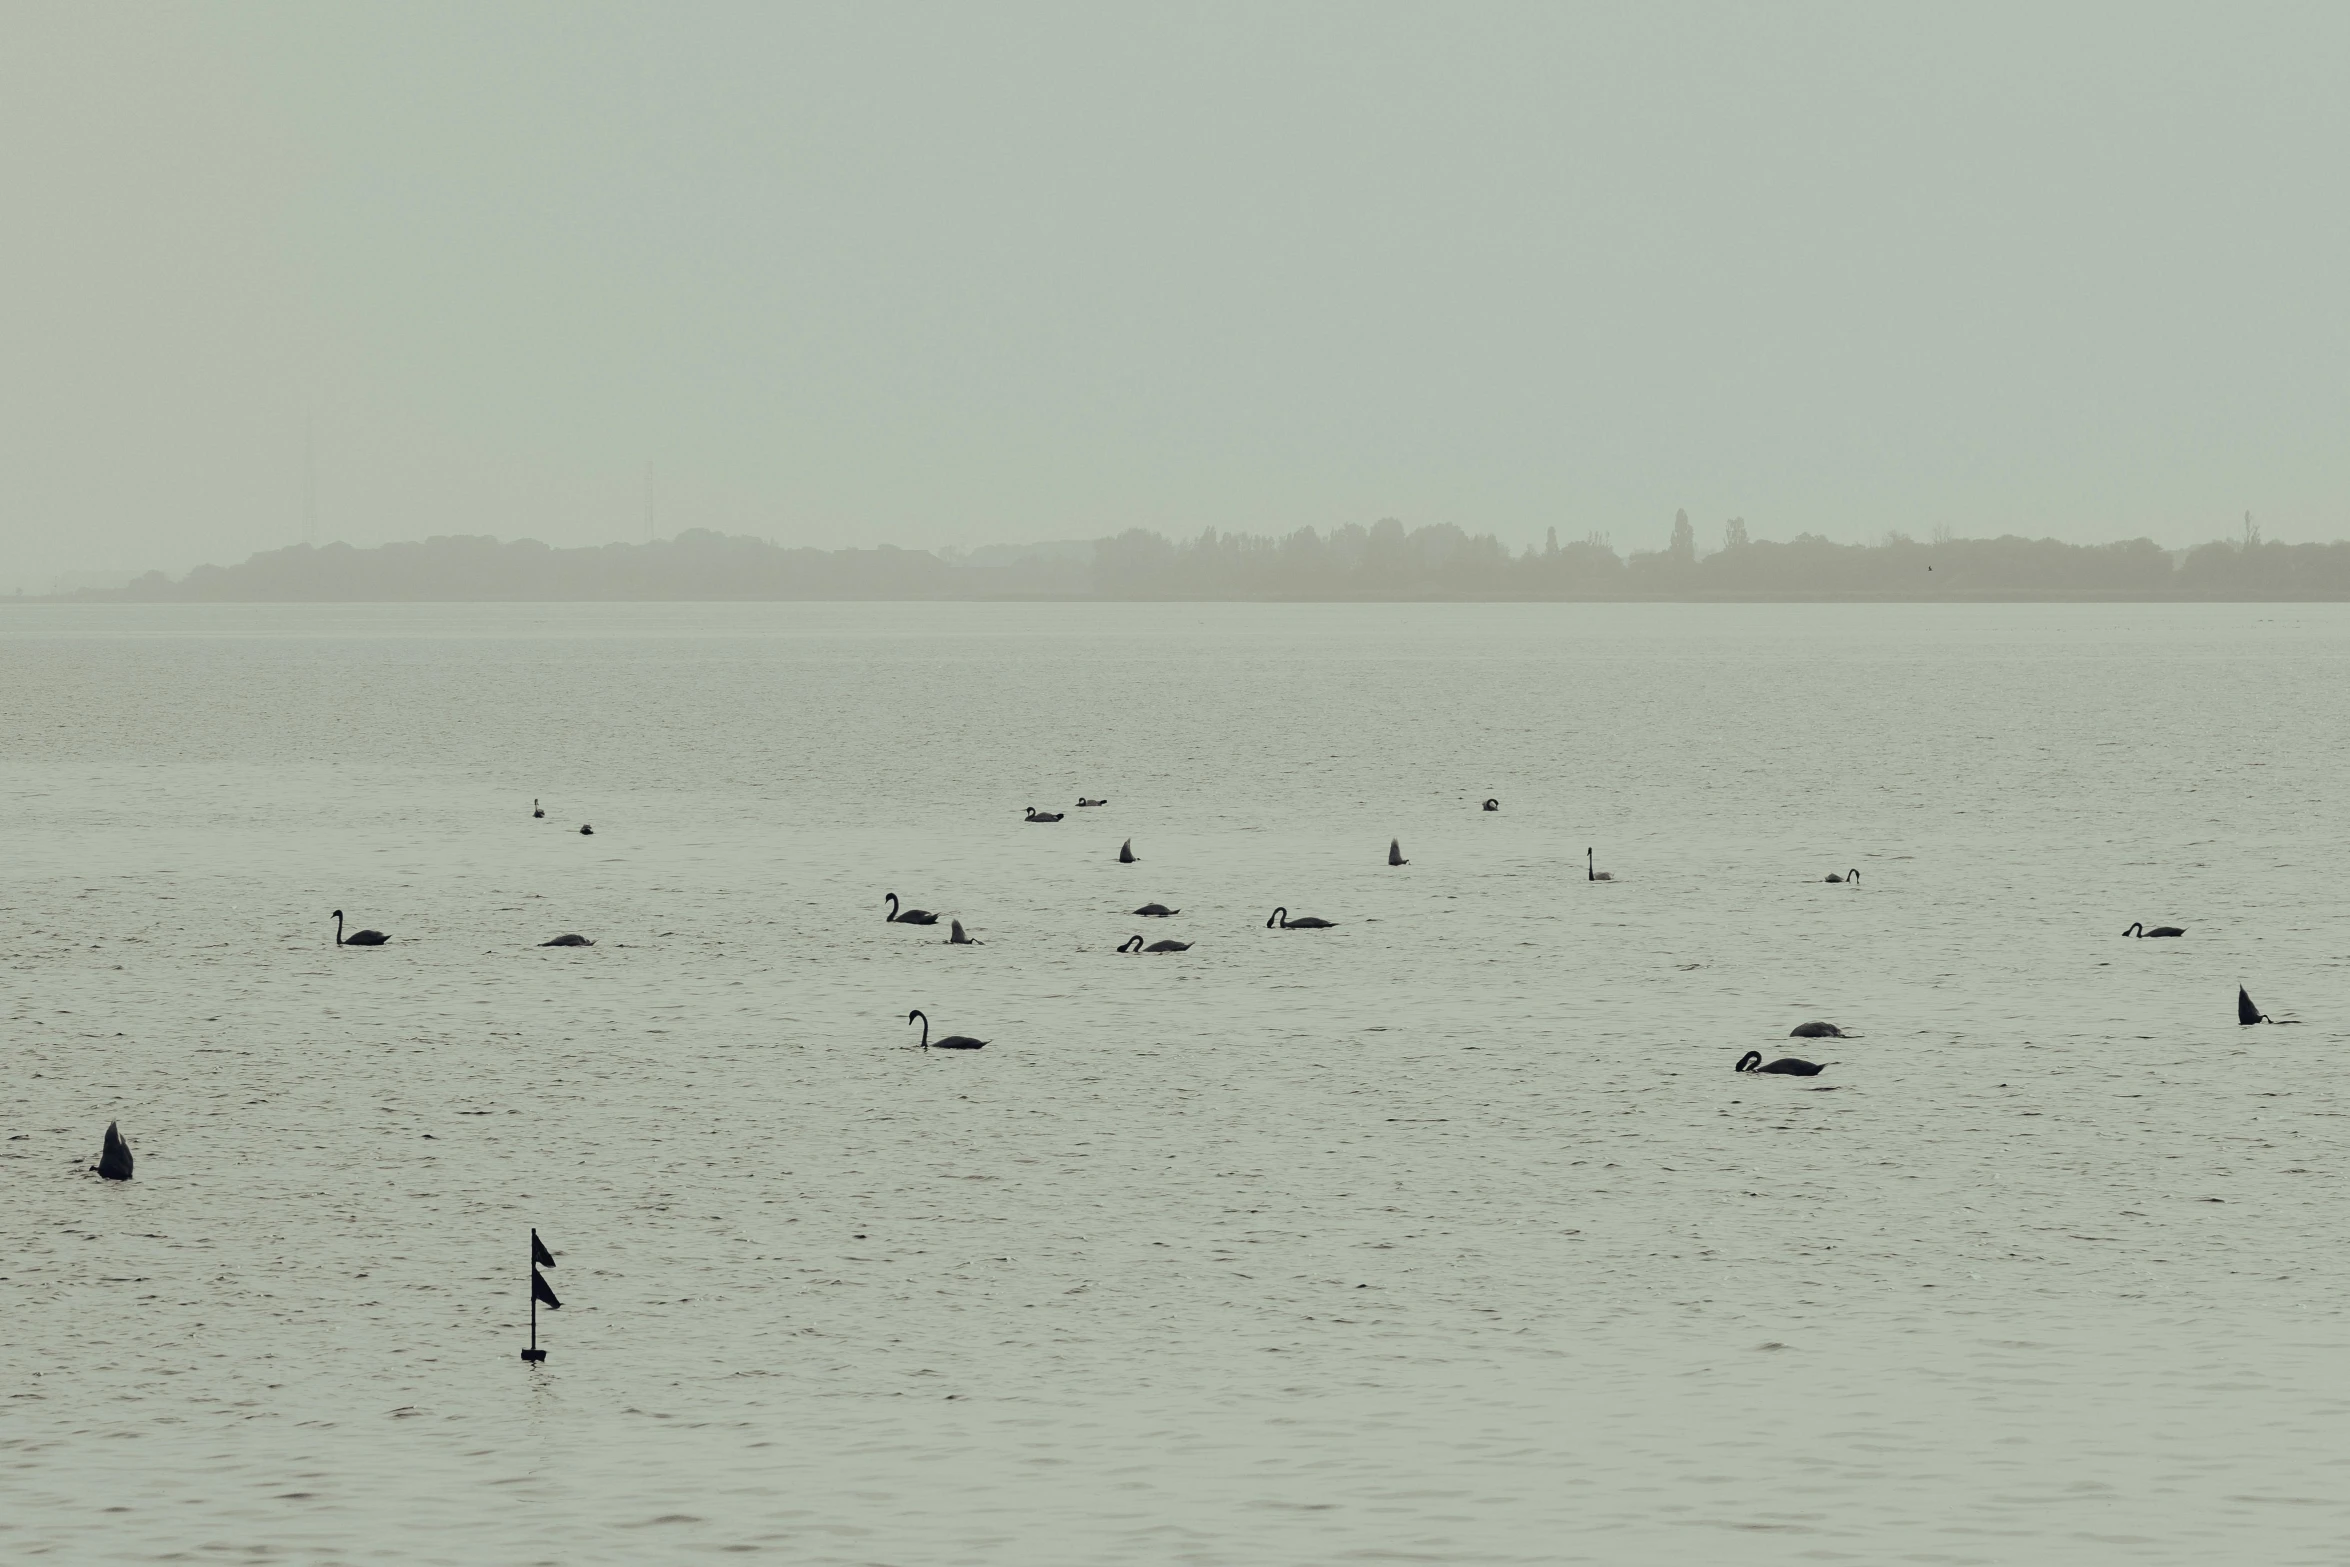 there are several birds that can be seen out in the water